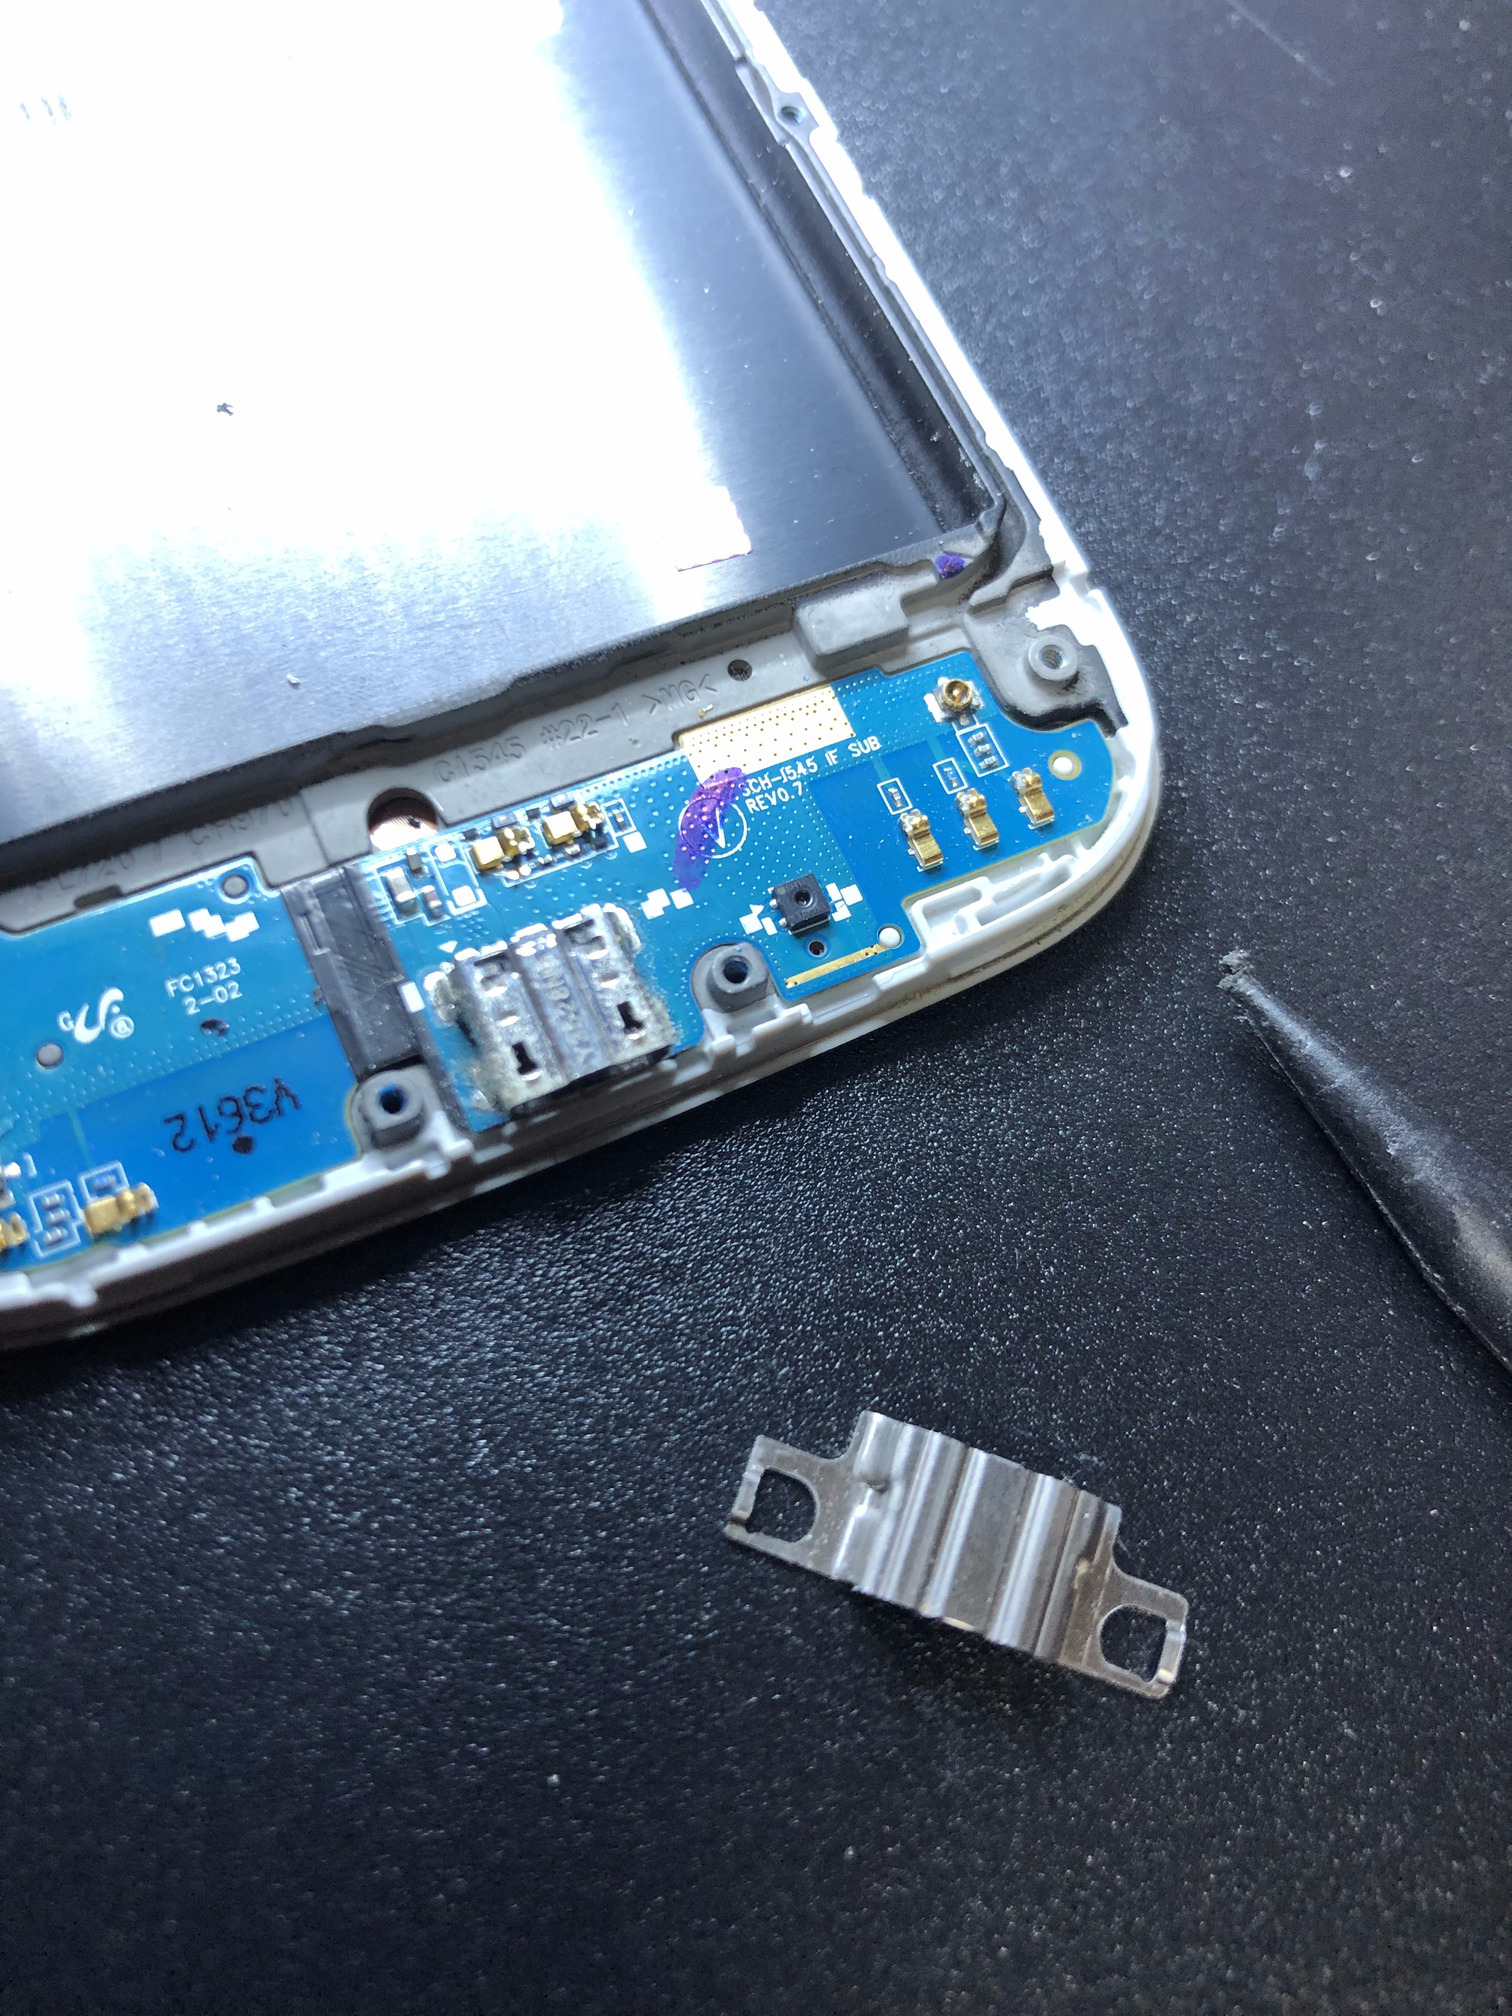 Remove the USB charging port cover using a spudger